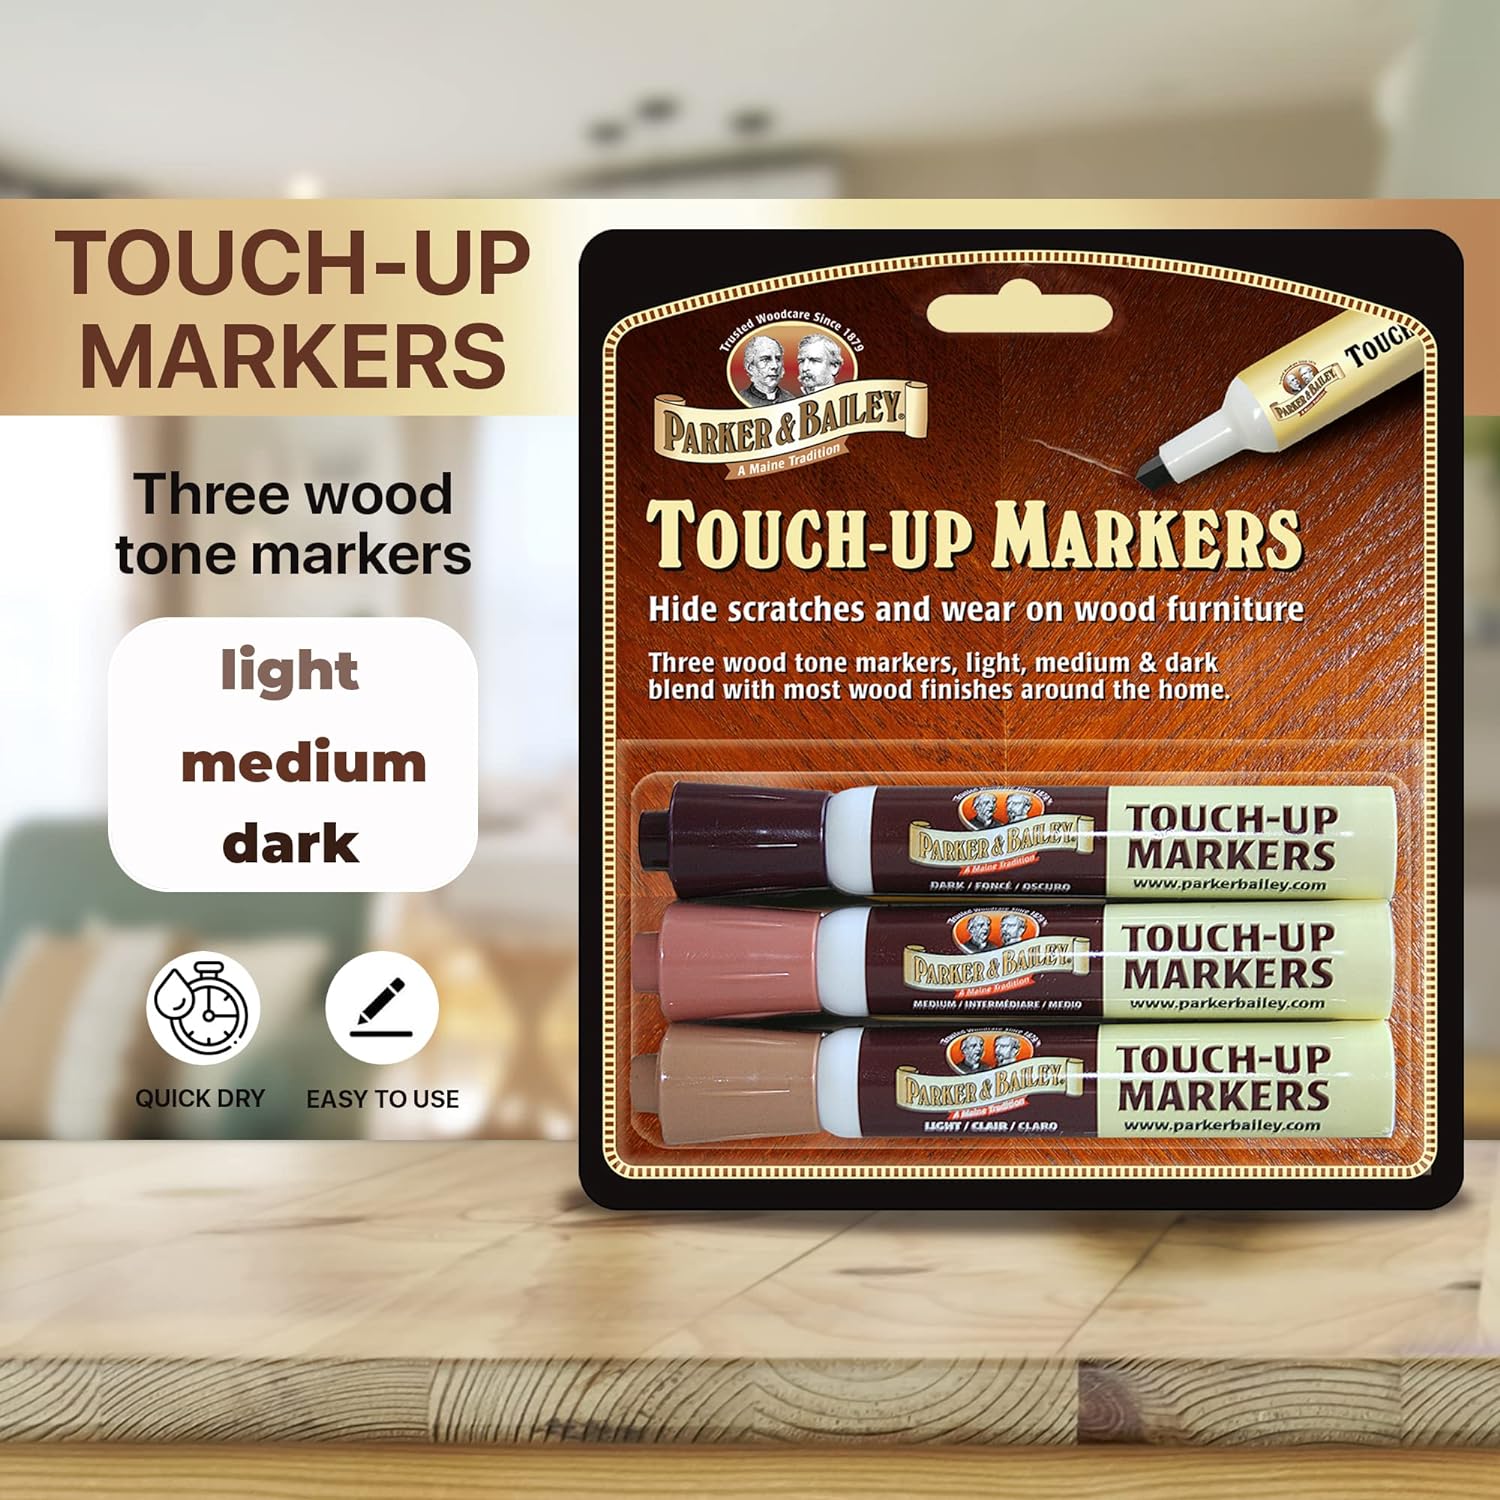 Parker & Bailey Touch-Up Markers - Furniture Markers Touch Up Furniture Scratch Repair Markers Wood Floor Scratch Remover Wood Marker Wood Stain Marker for Wood Furniture Wood Pens for Scratches : Health & Household